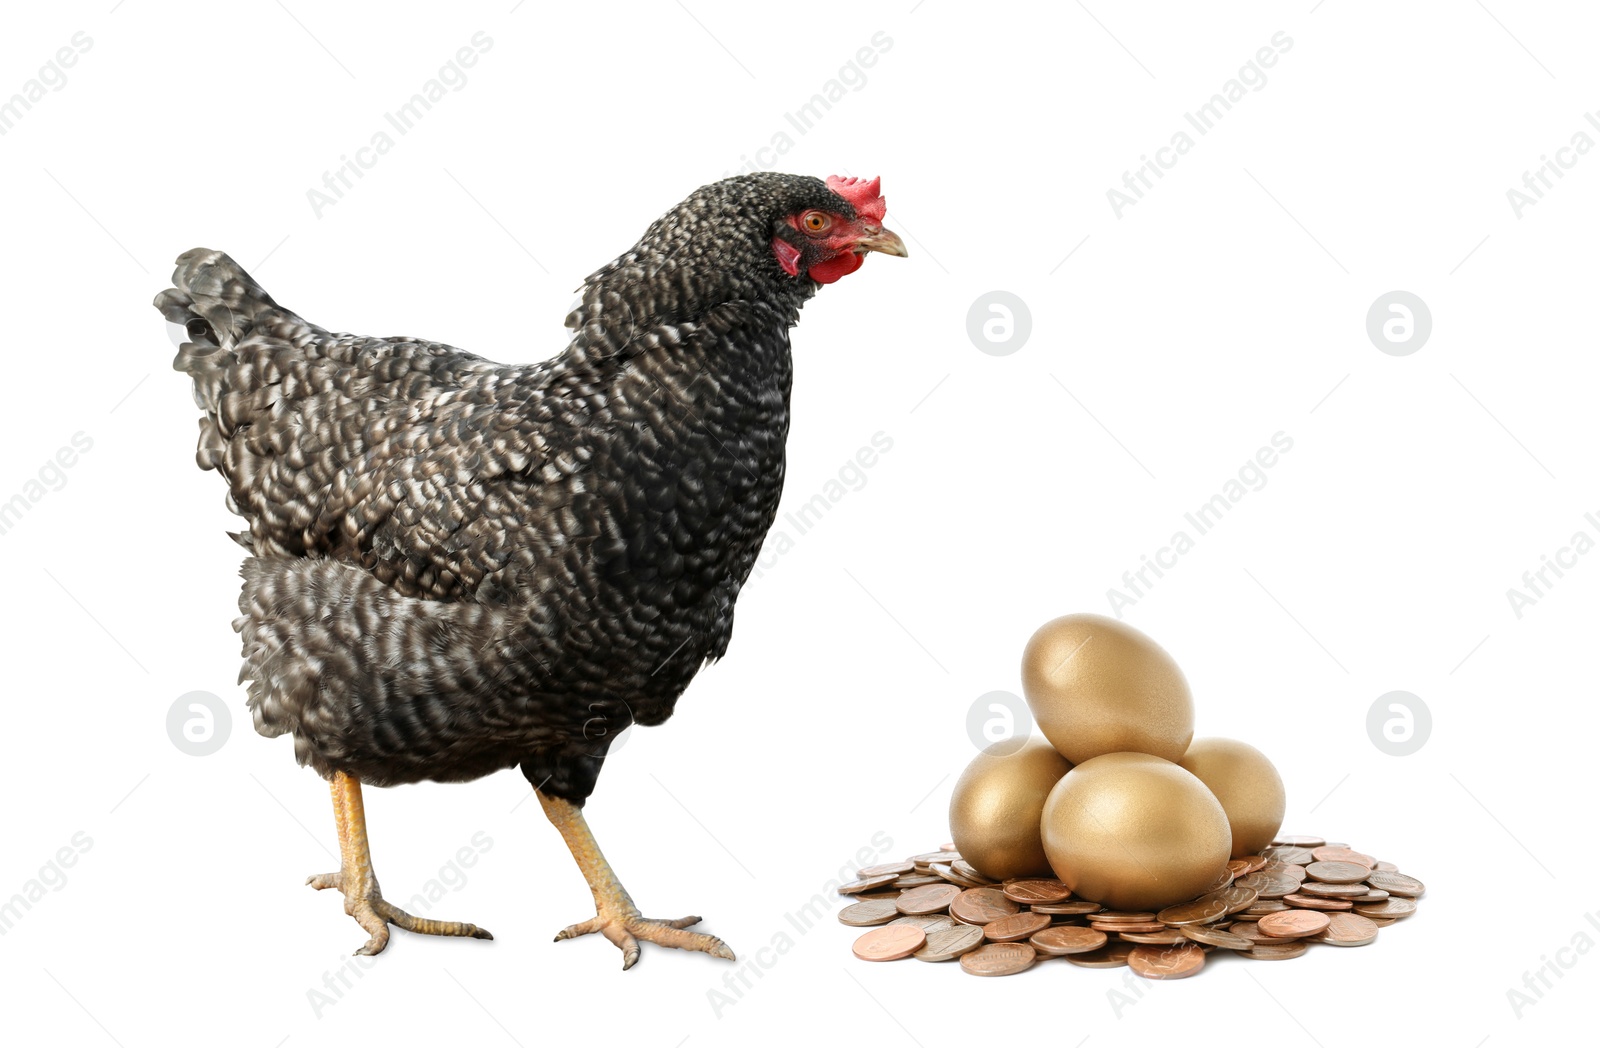 Image of Chicken, golden eggs and coins on white background